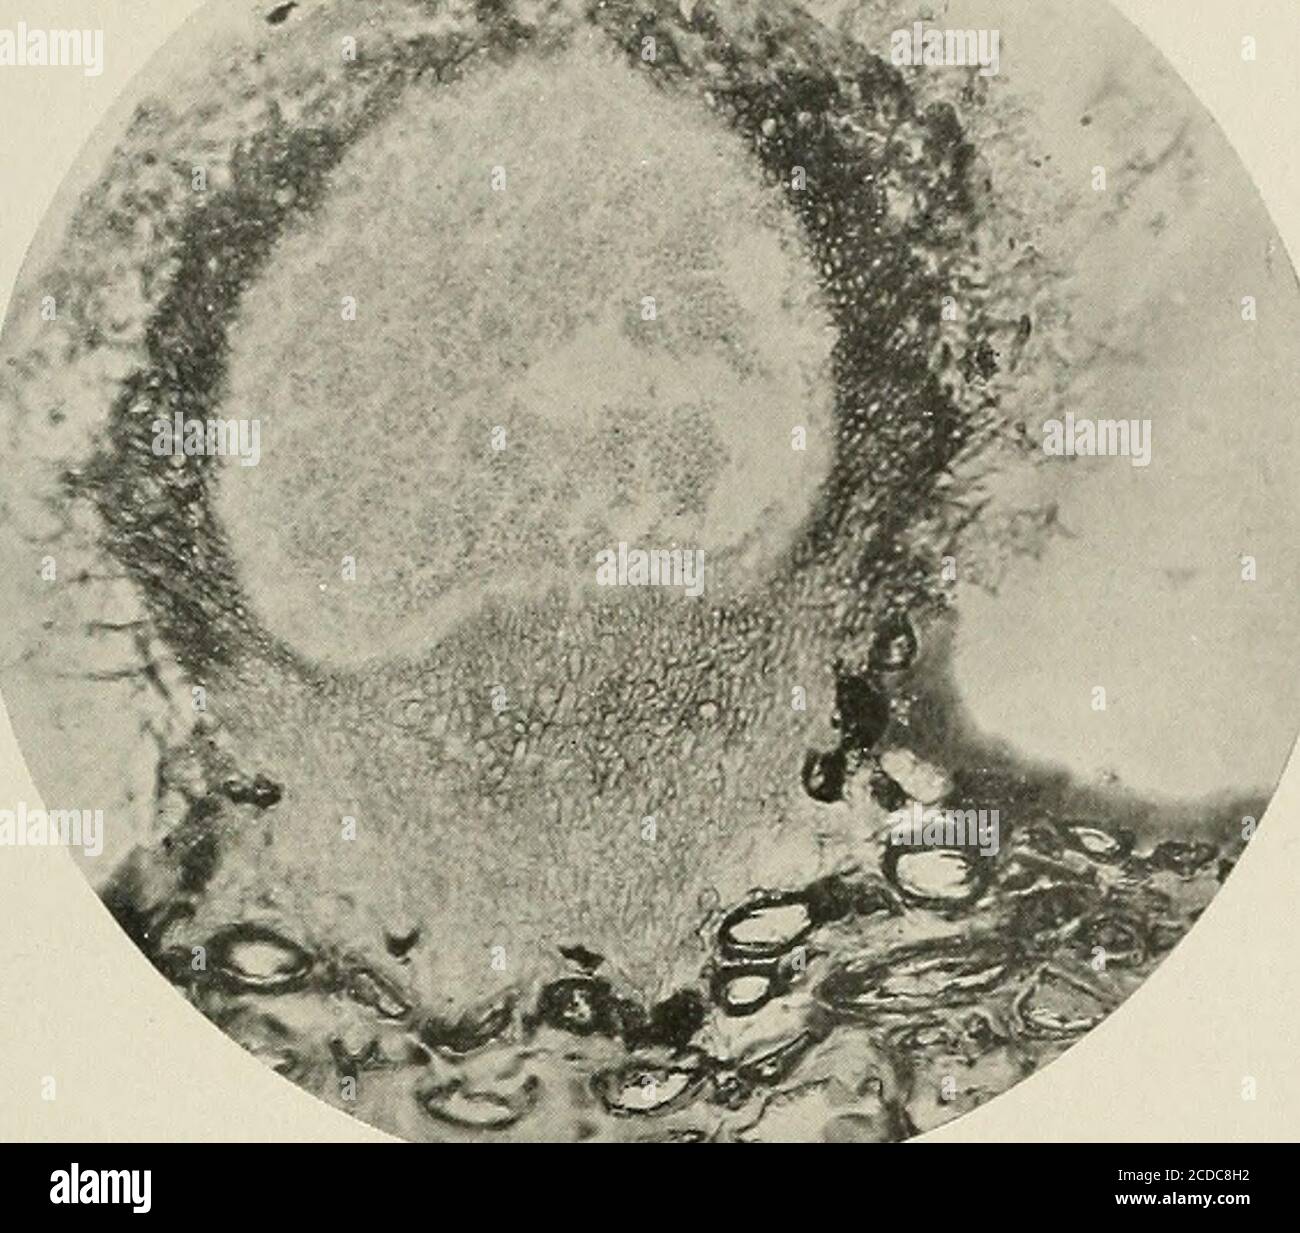 . Annual report of the Maine Agricultural Experiment Station . Fig. 40. Pycnidium of P/ioiiia. x 180. .MP. Fig. 41. Mature pycnidium of Phoma showing thecavity filled with spores, x 160. Stock Photo